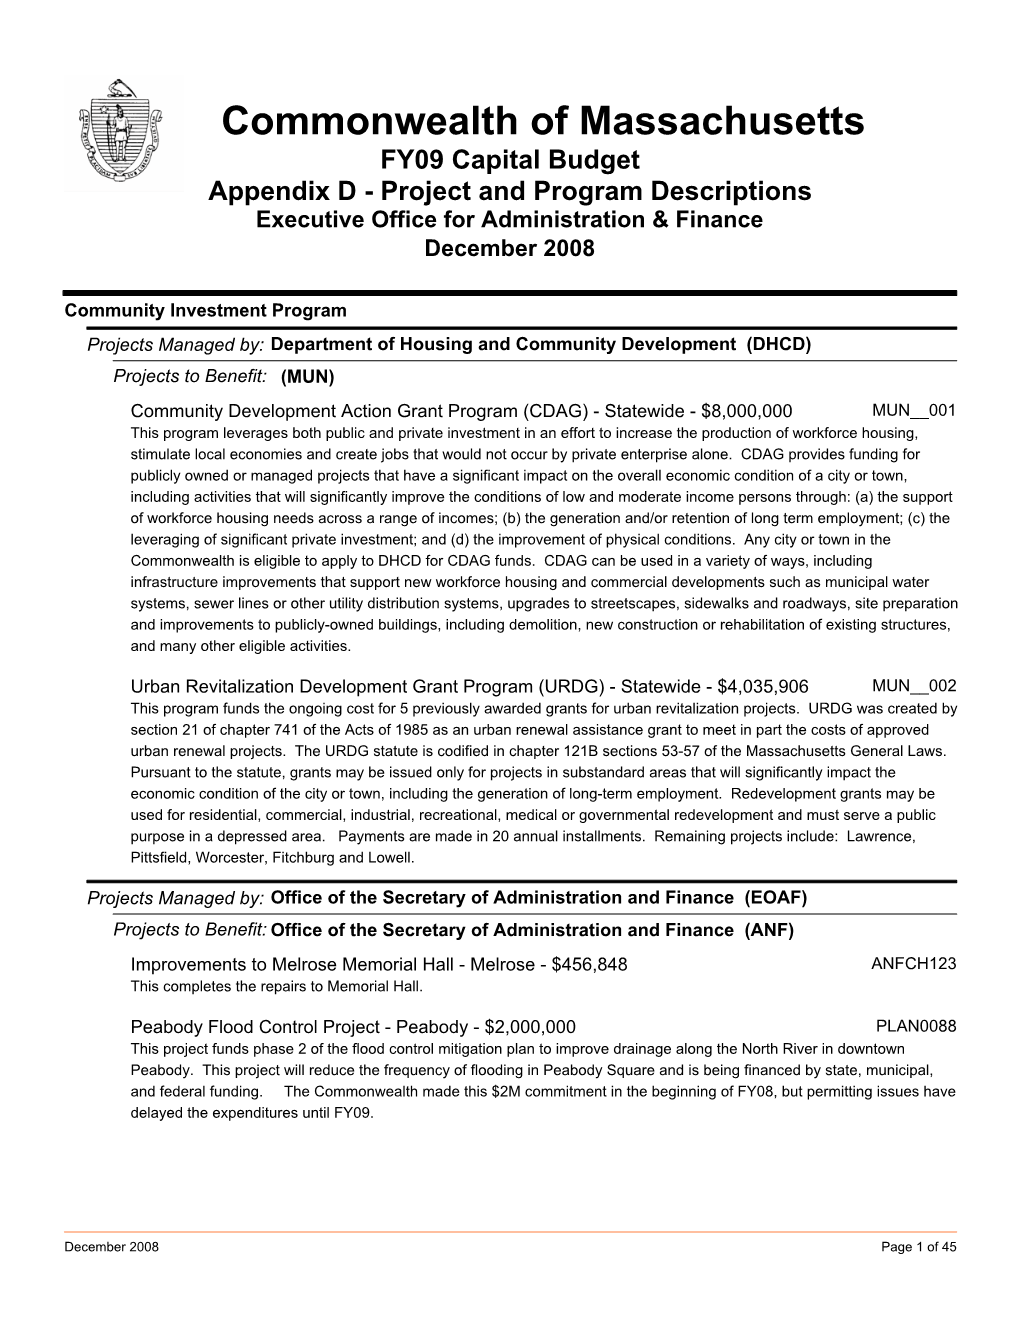 Commonwealth of Massachusetts FY09 Capital Budget Appendix D - Project and Program Descriptions Executive Office for Administration & Finance December 2008